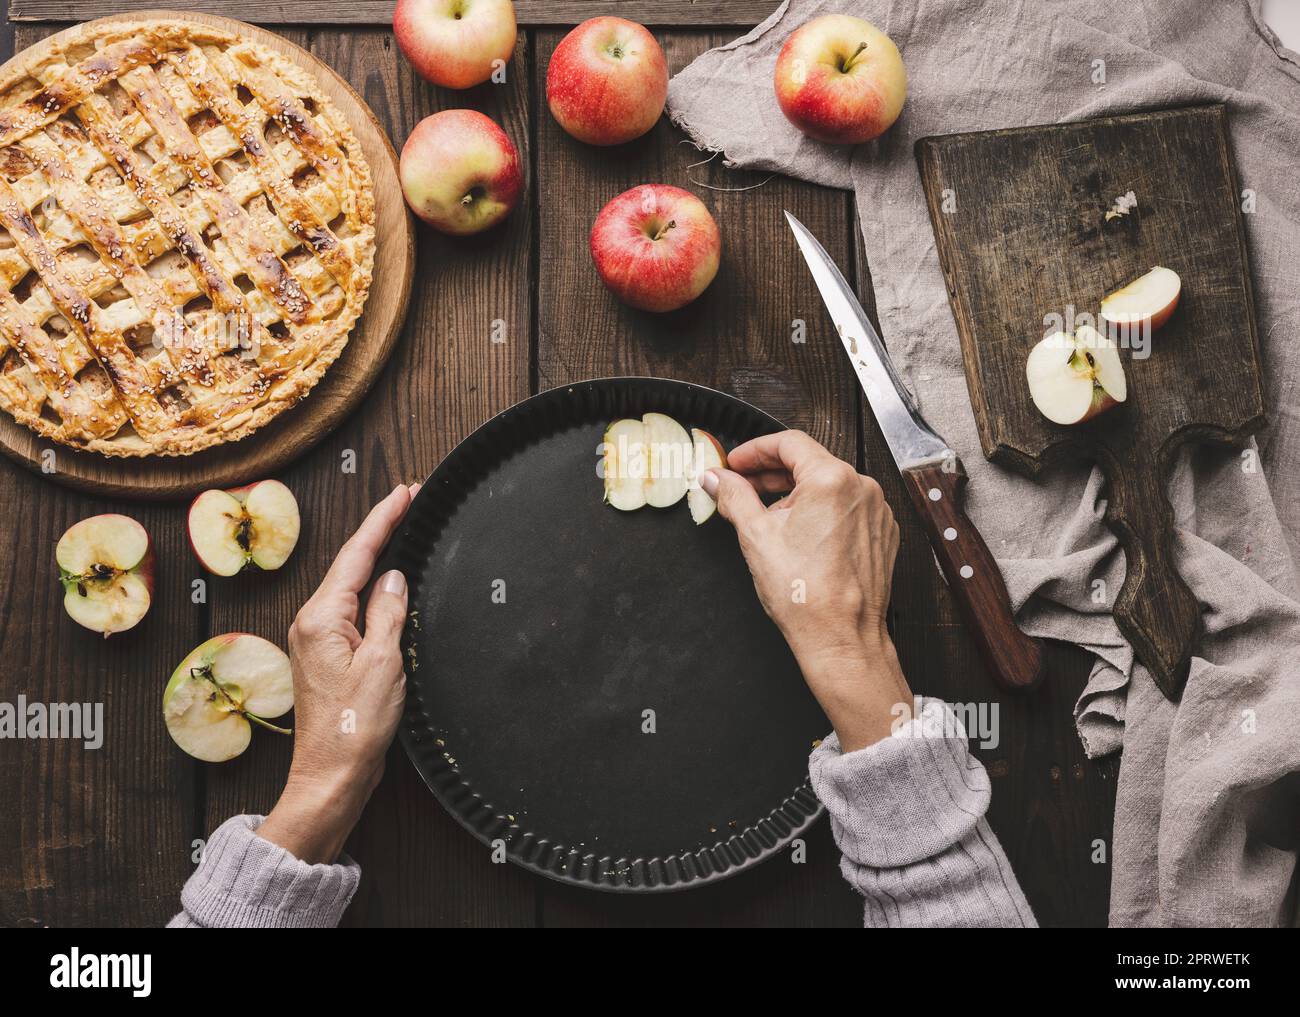 A woman puts apple slices in a round baking sheet on the table, next to the ingredients Stock Photo